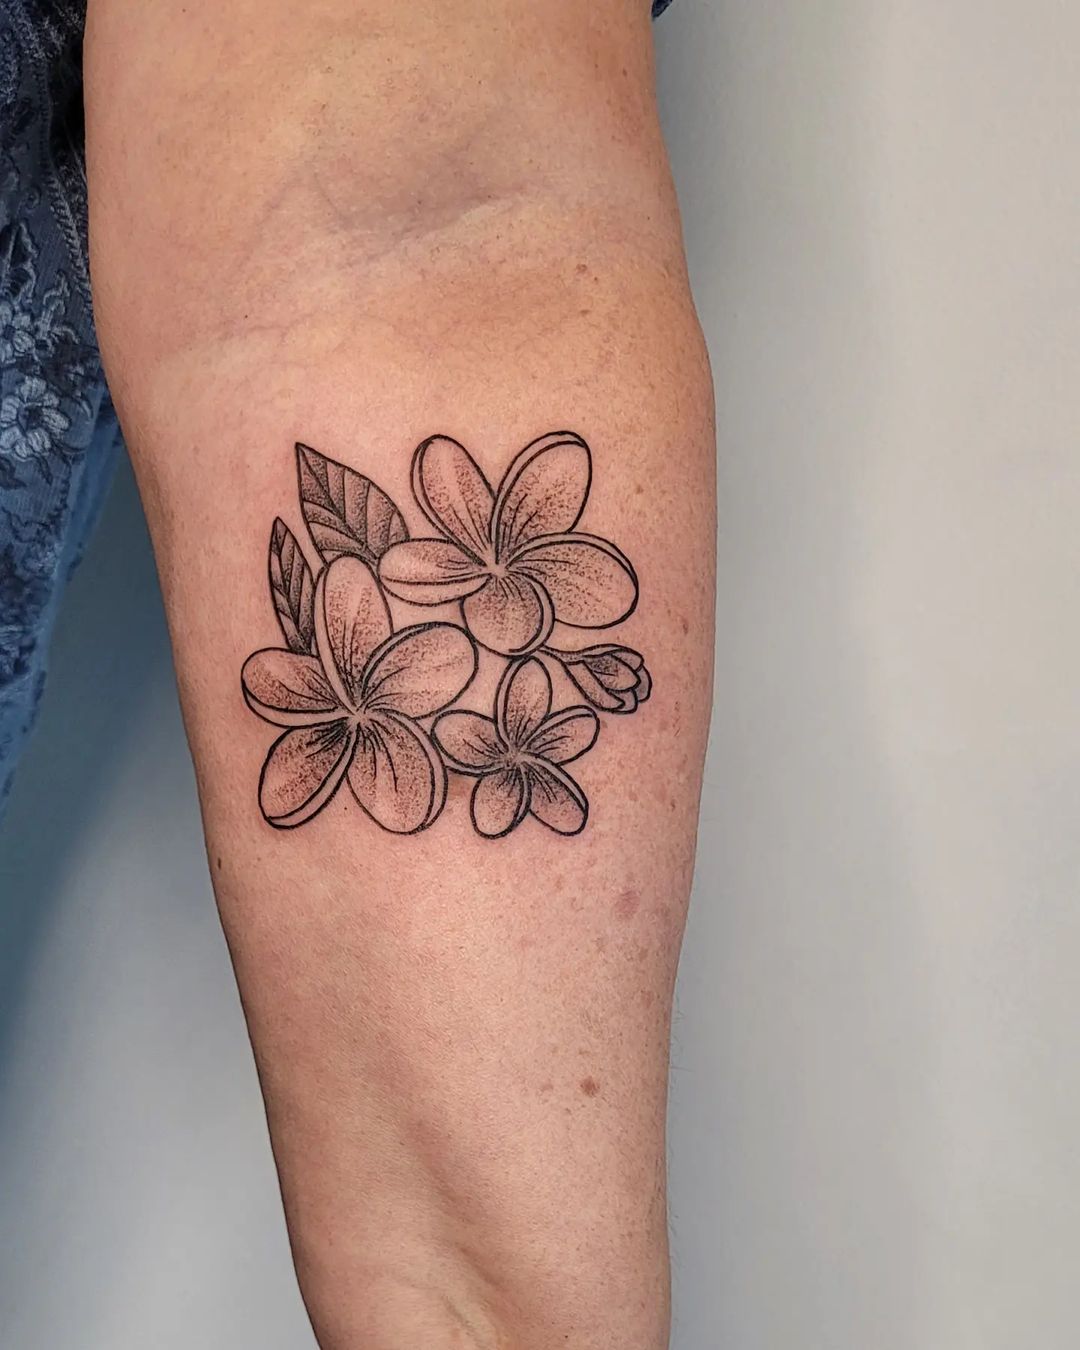 Tiare flower tattoo meaning and symbolism 